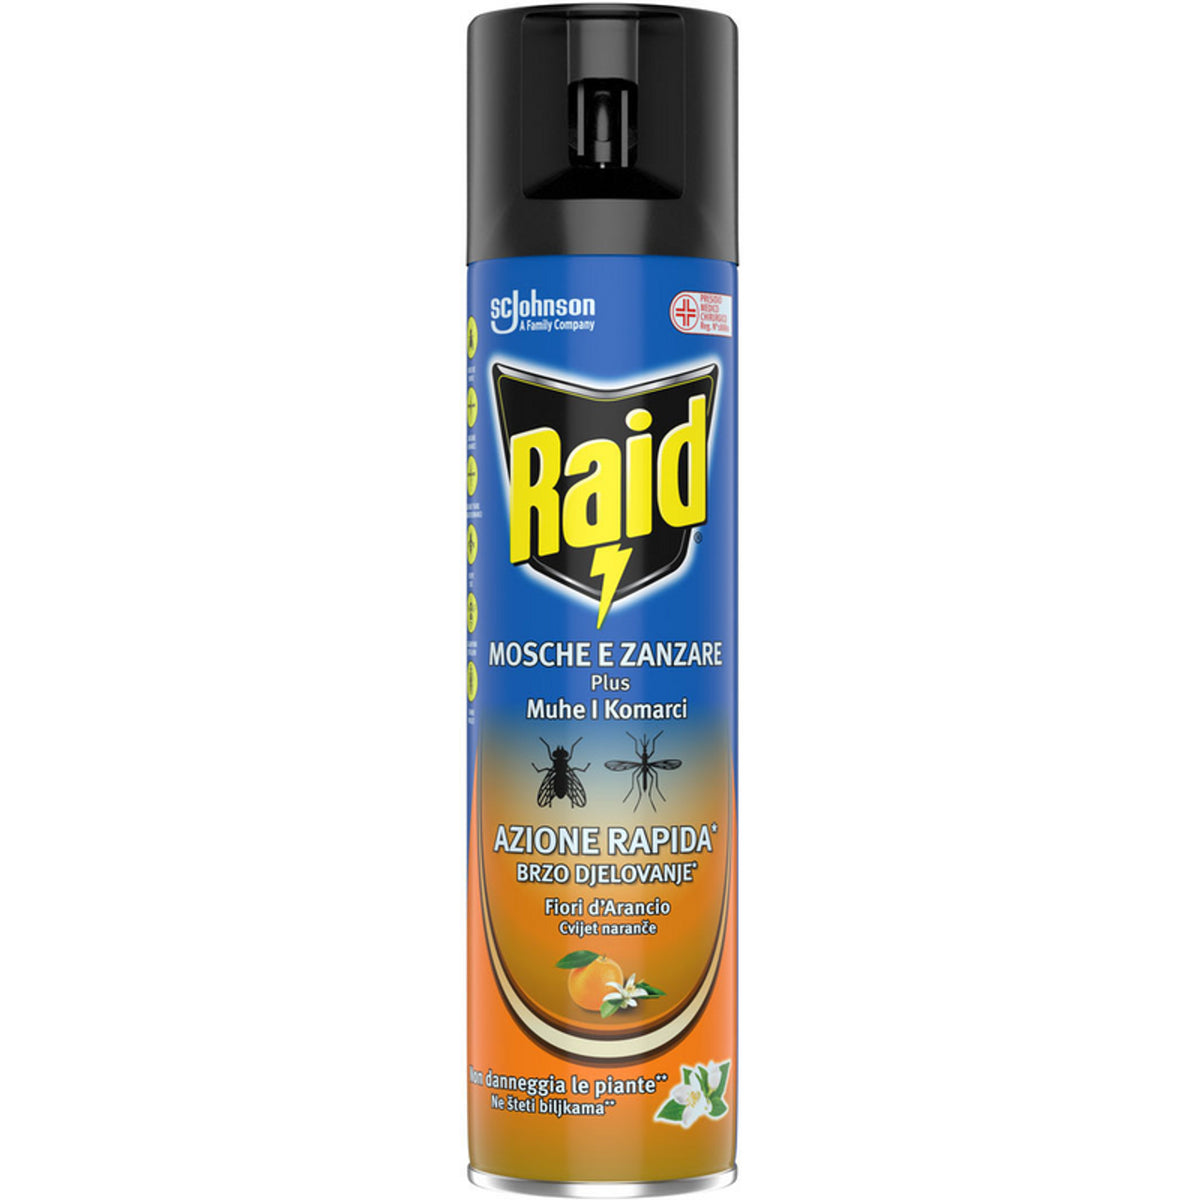 Raid Insecticide spray flies and mosquitoes plus rapid action orange flowers 400 ml